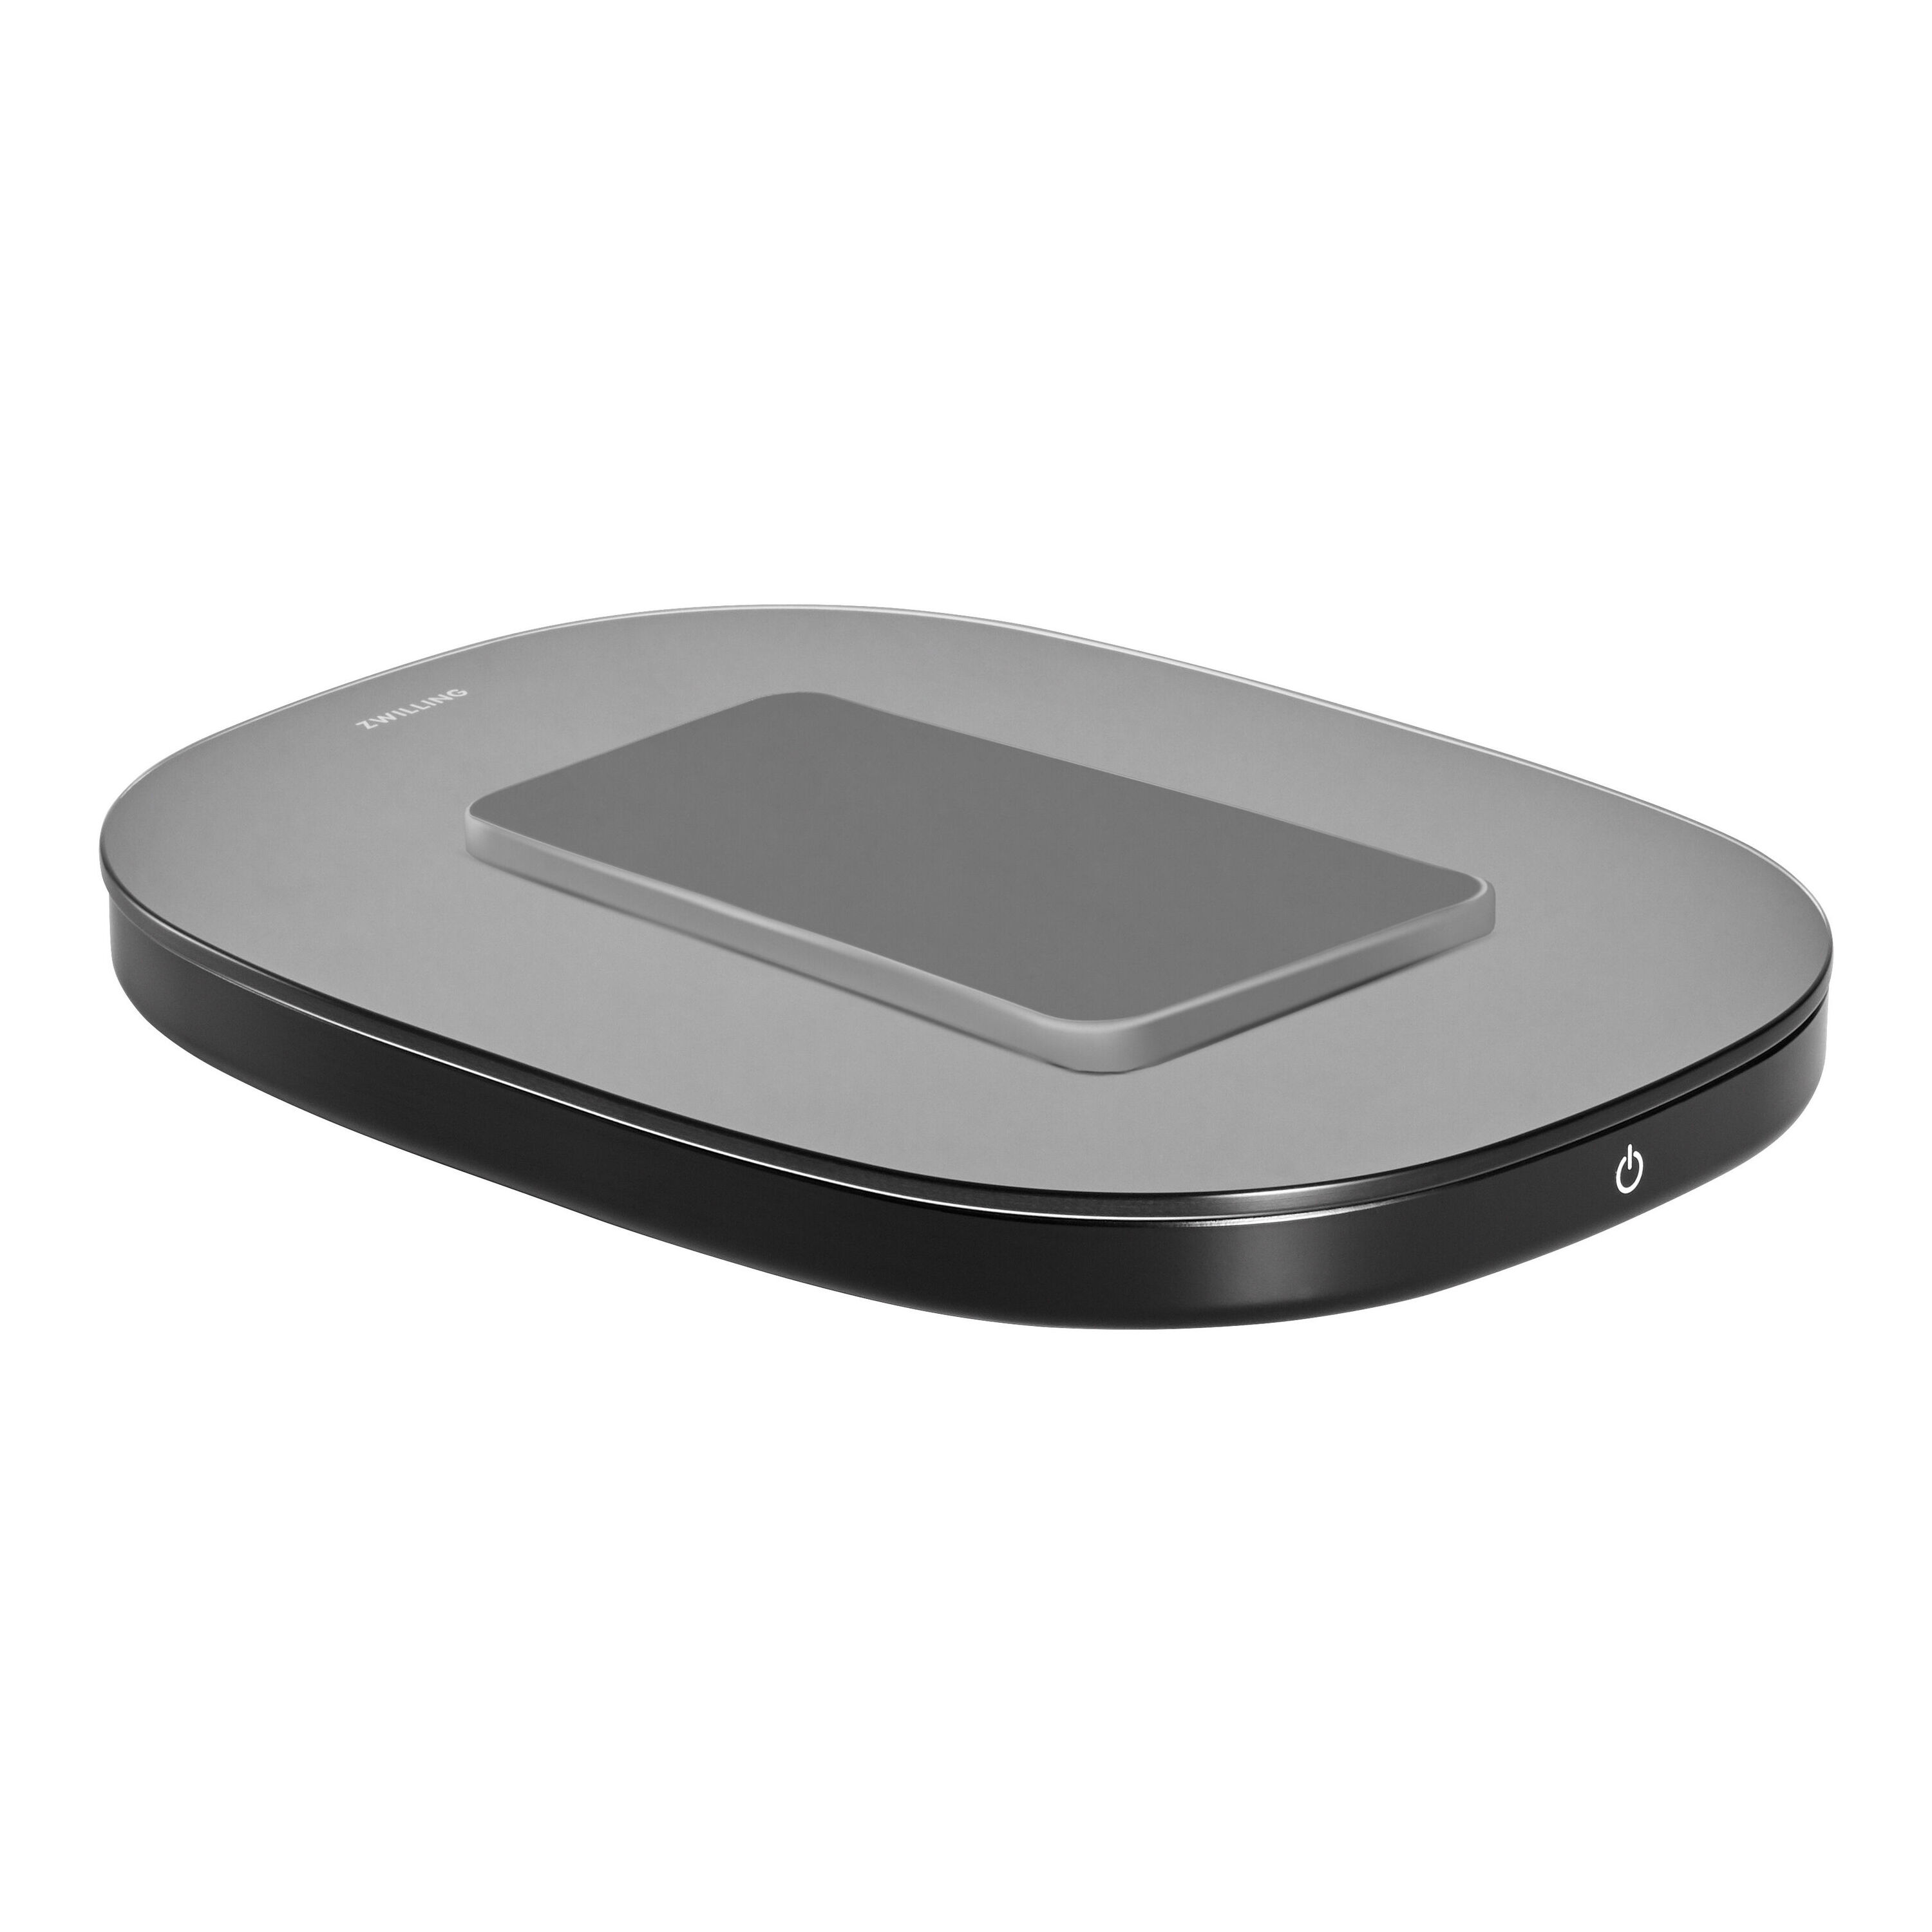  ZWILLING Enfinigy Digital Kitchen Food Scale, Max